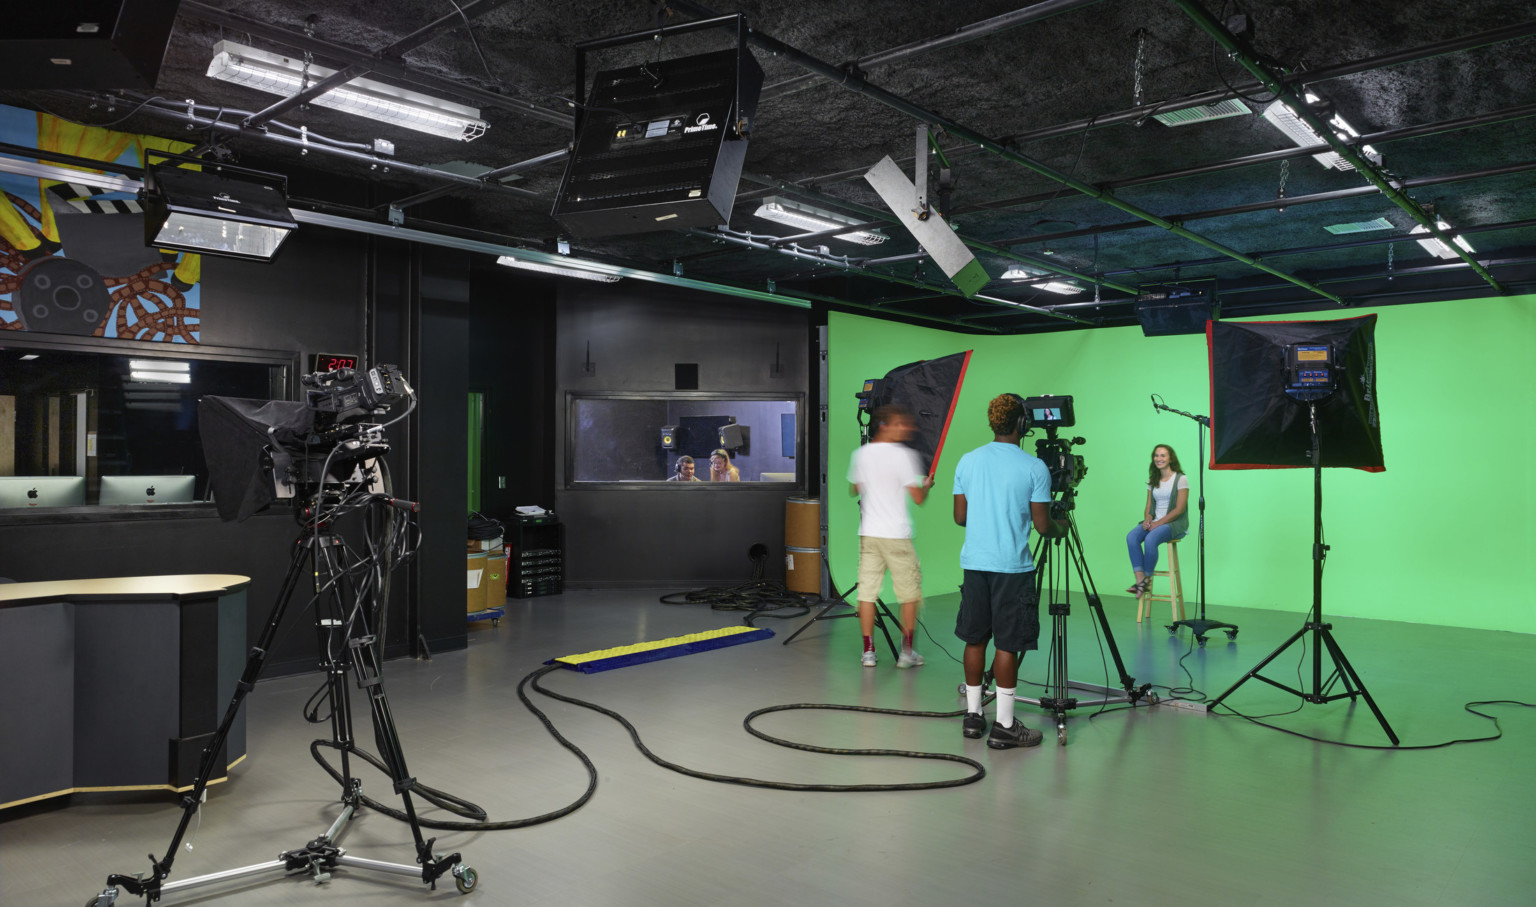 Students operate camera and lighting equipment in front of green screen in black room. Window, left, to editing room